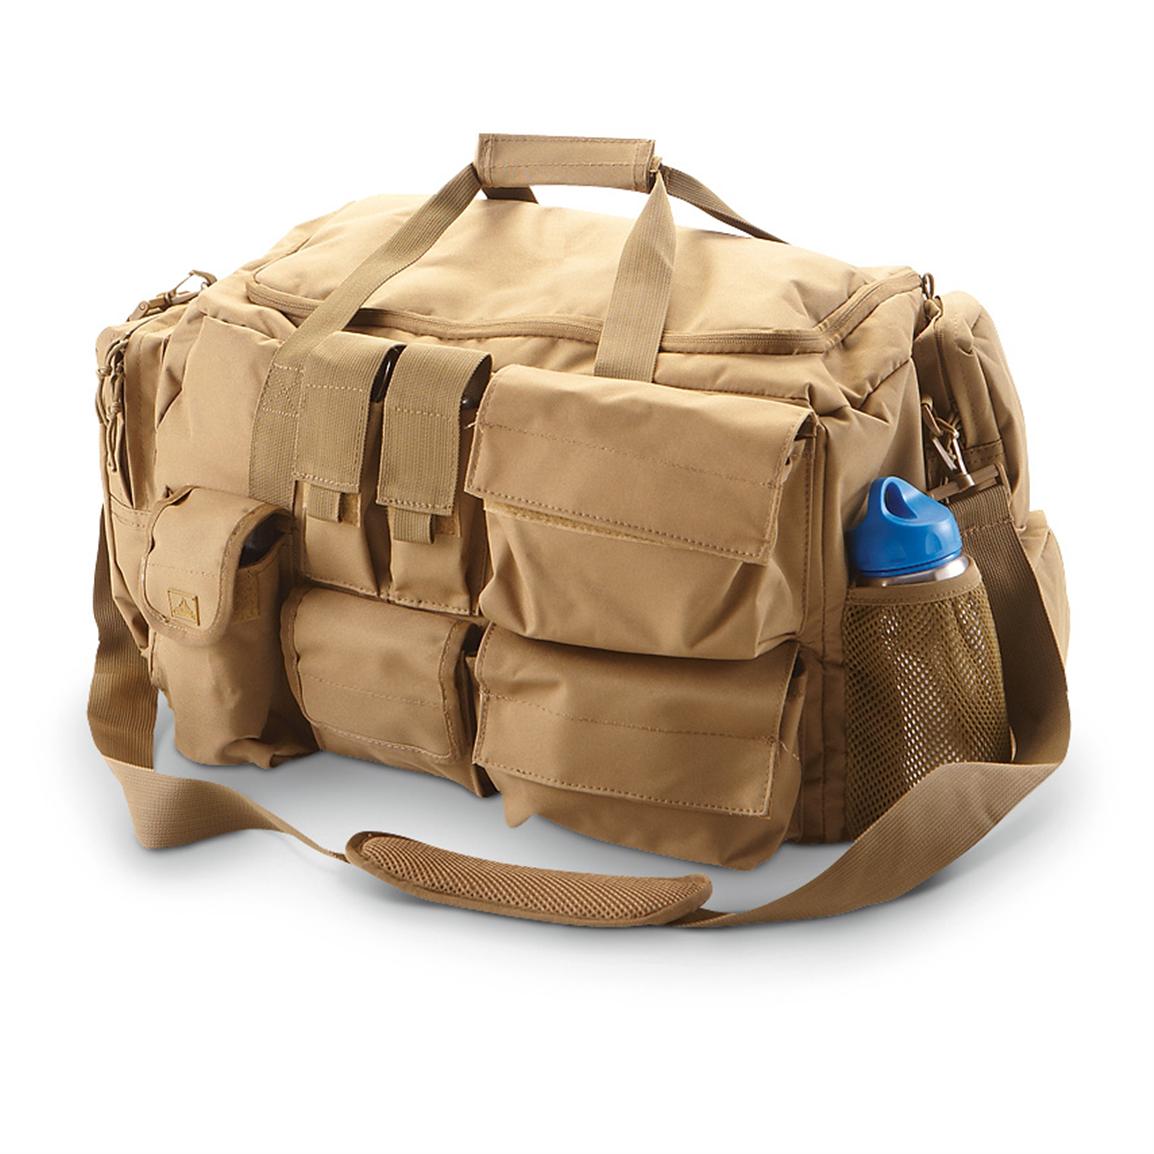 Red Rock Operations Duffel, Coyote; 37,375-cu. in. capacity